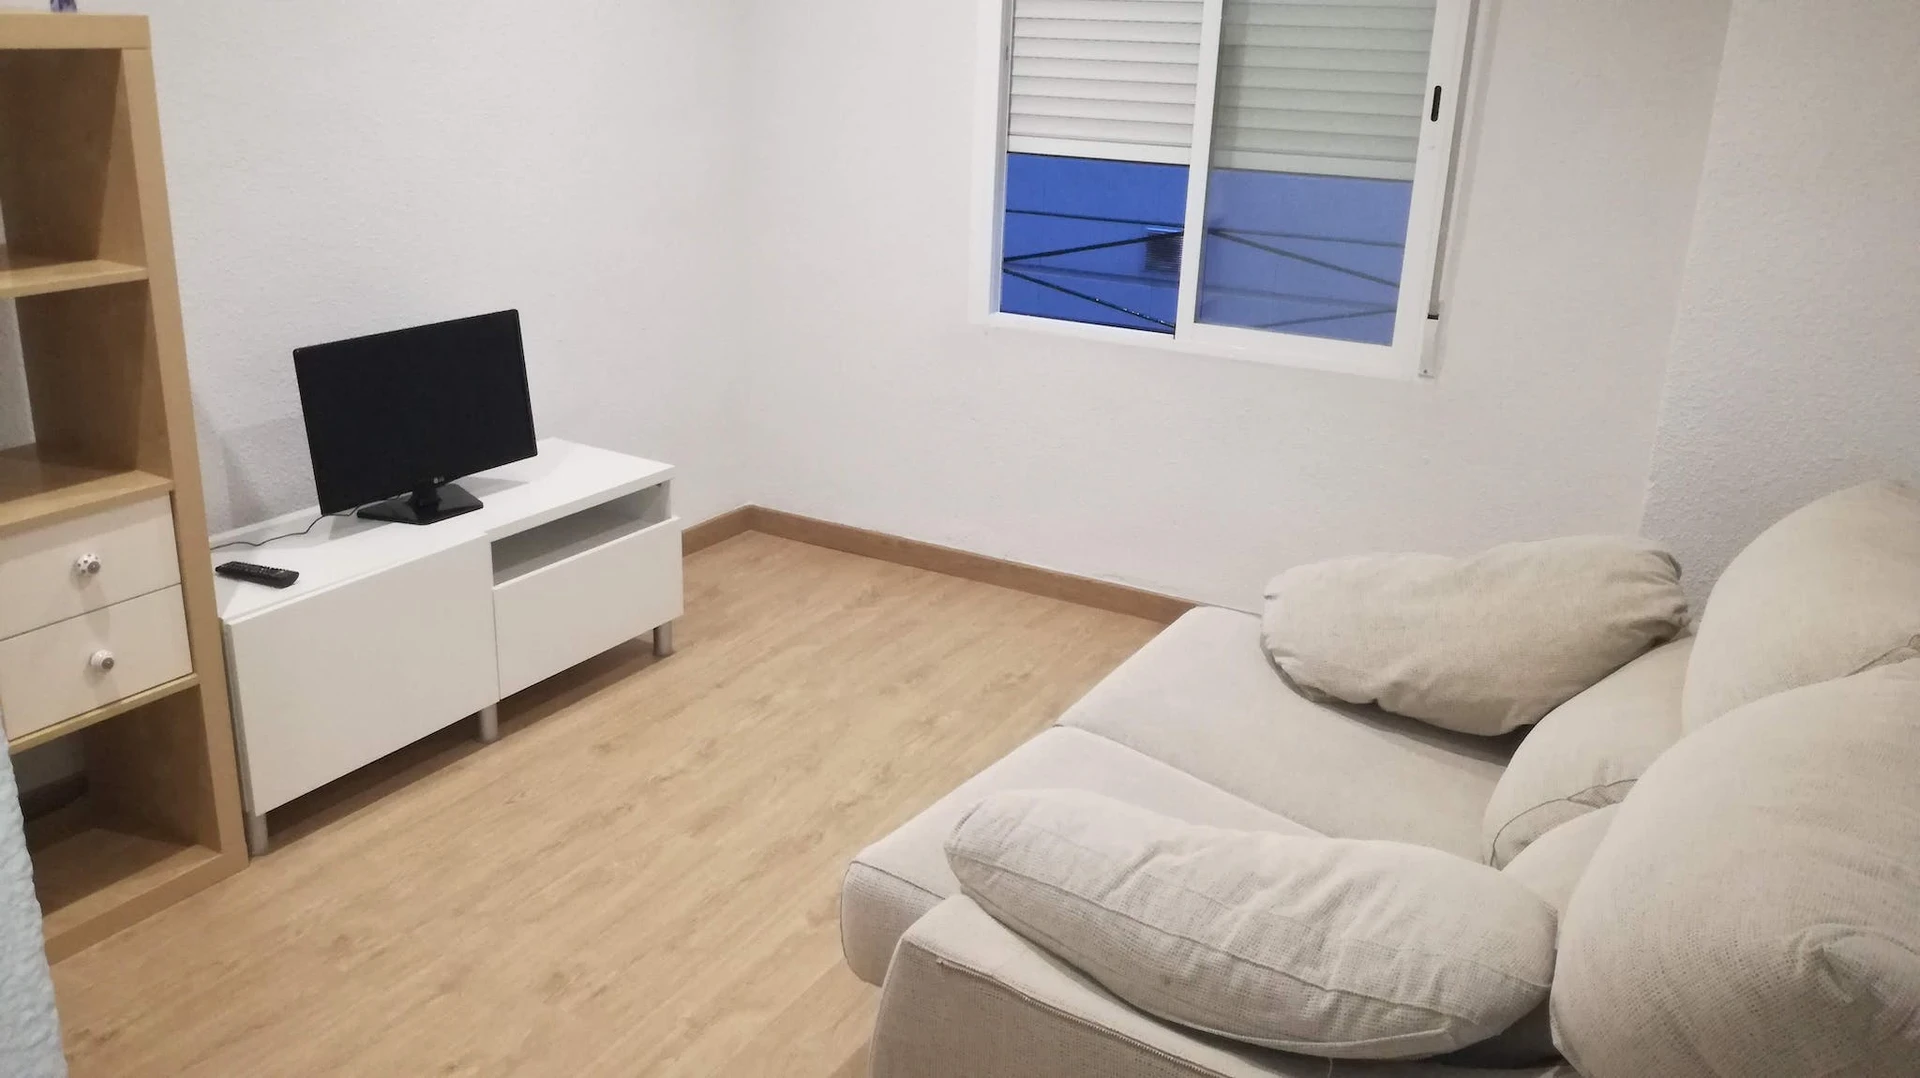 Accommodation with 3 bedrooms in Elche